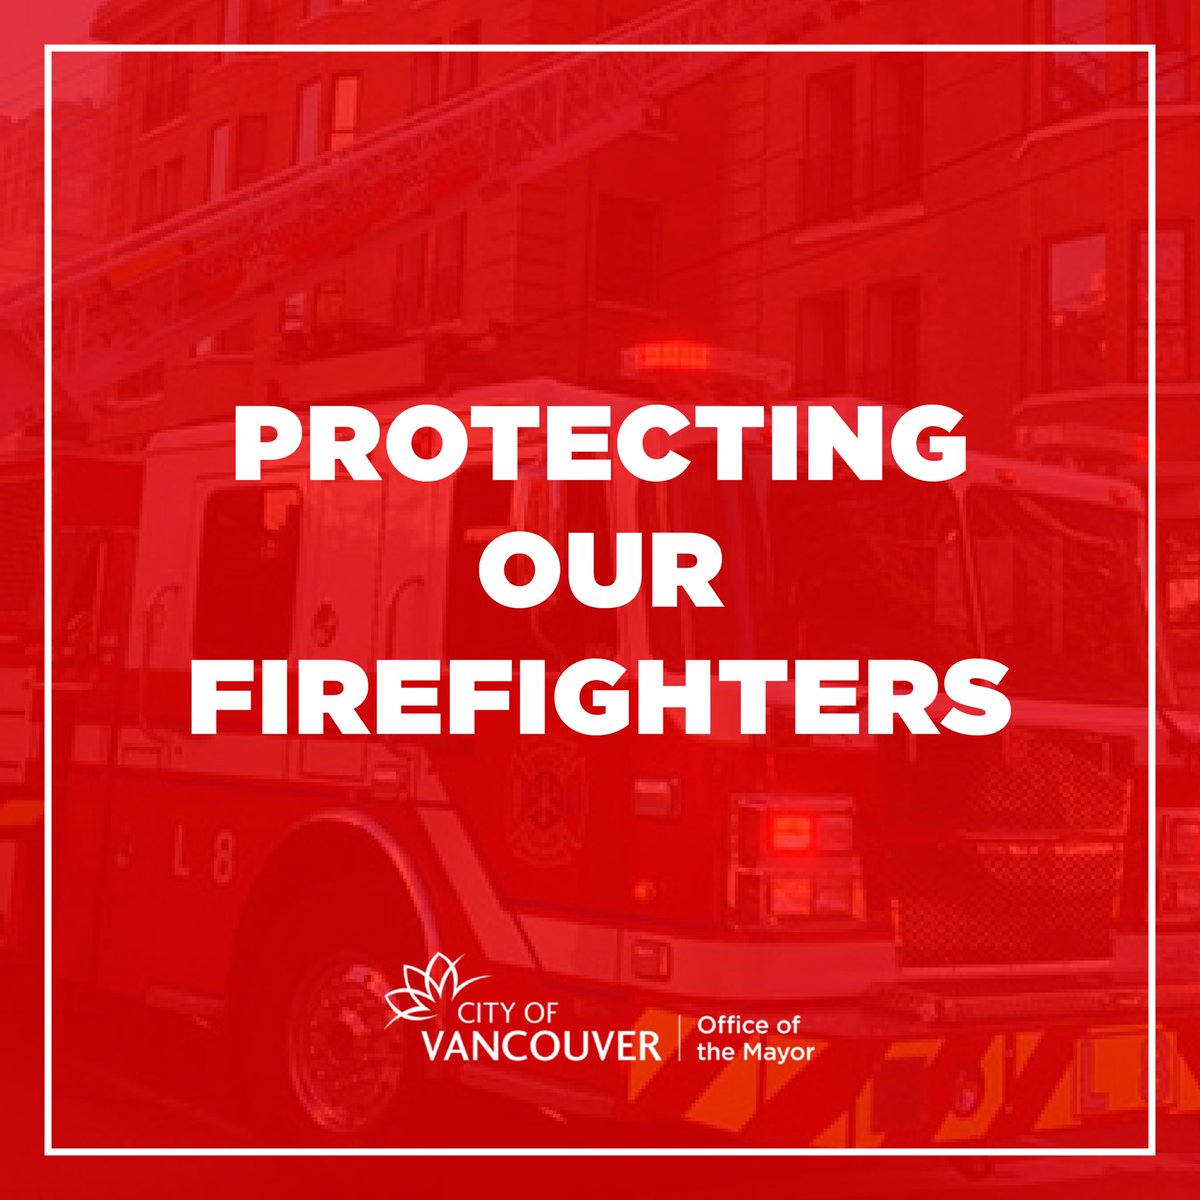 🚒👨‍🚒 Big news! Vancouver is leading the charge as the FIRST city in North America to get rid of cancer causing fire jackets! We love our firefighters and we’re committed to protecting them.